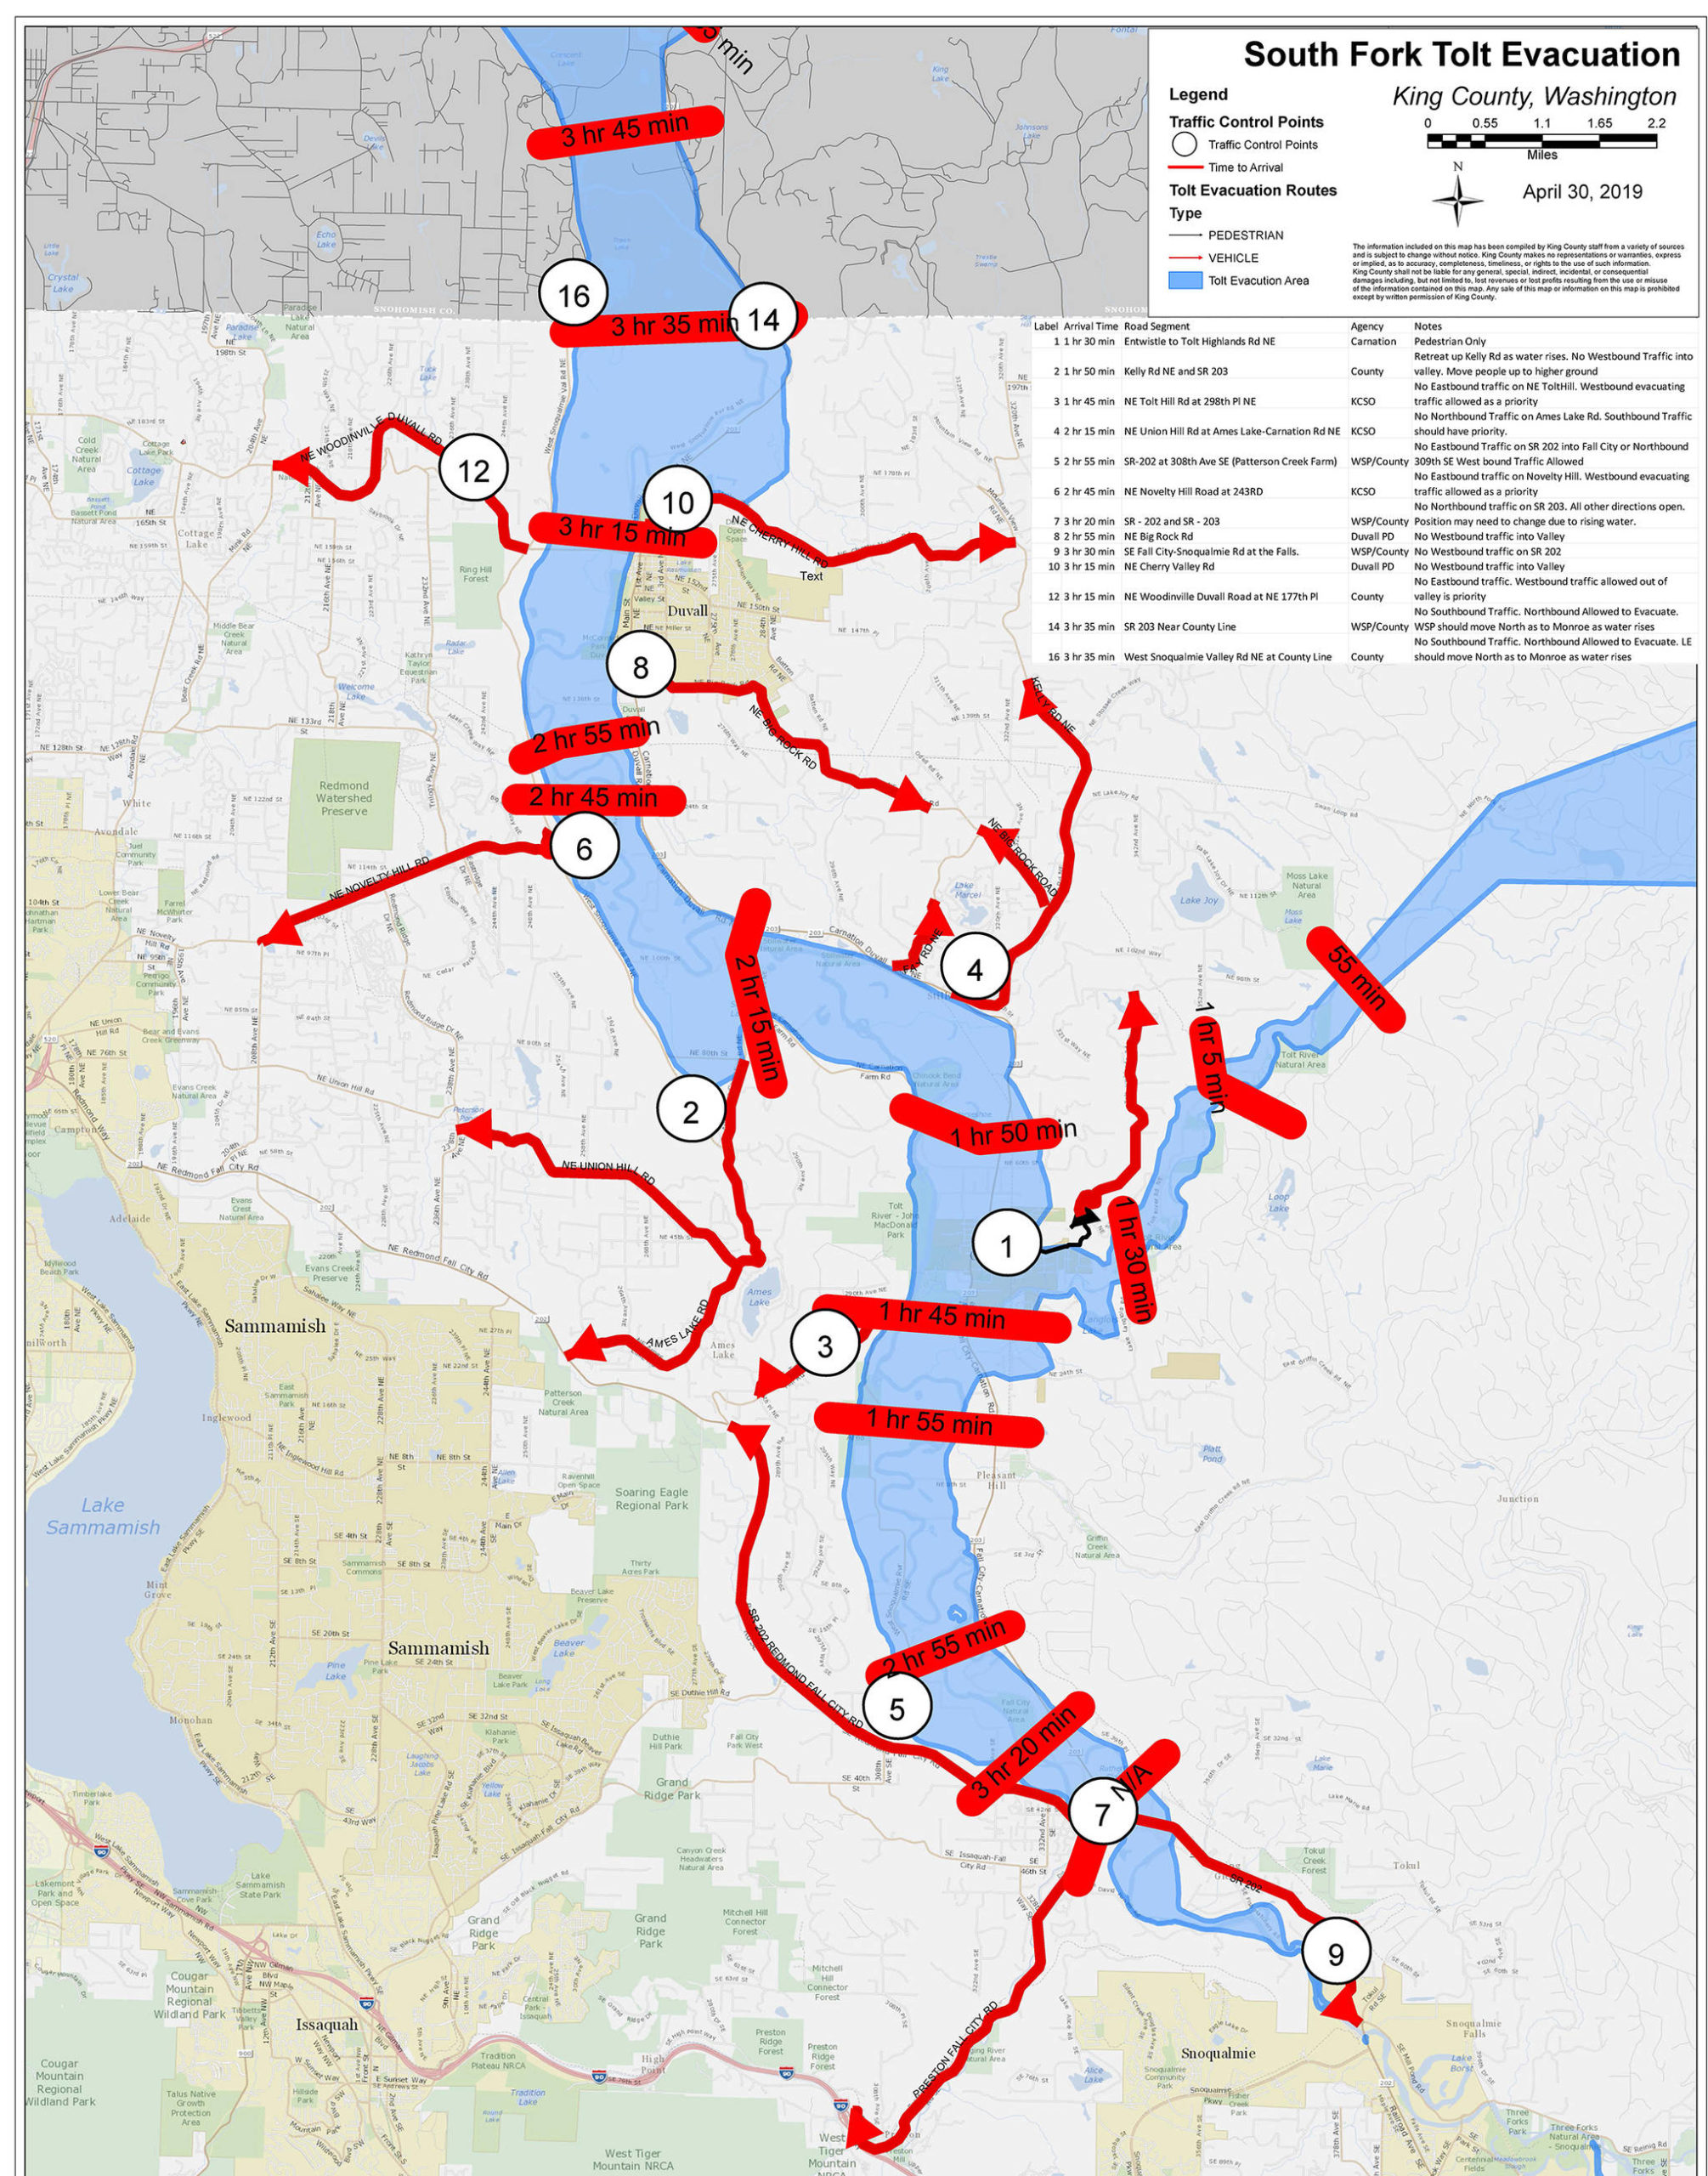 A inundation map outlining areas of King County which are likely to flood if the Tolt River Dam fails. This map was obtained through a records request made by the Snoqualmie Valley Record to Seattle Public Utilities.